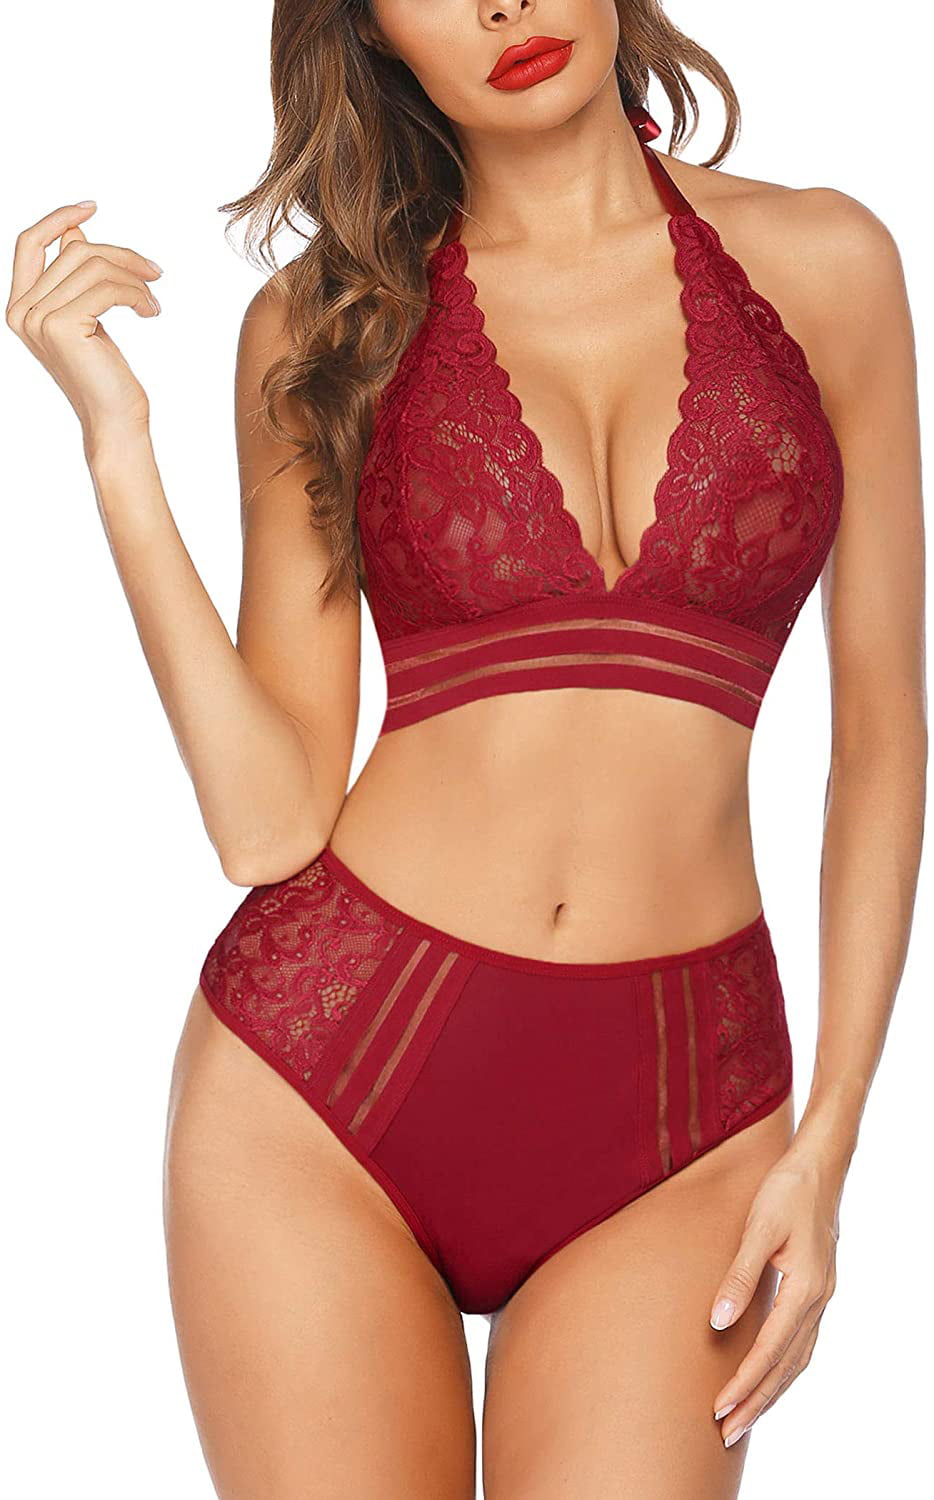 Cemetery Relaxing Unjust Sexy Bra and Panty Set for Women Lace Lingerie Set Two Piece High Waist Lingerie  Dark Red X-Large - Walmart.com